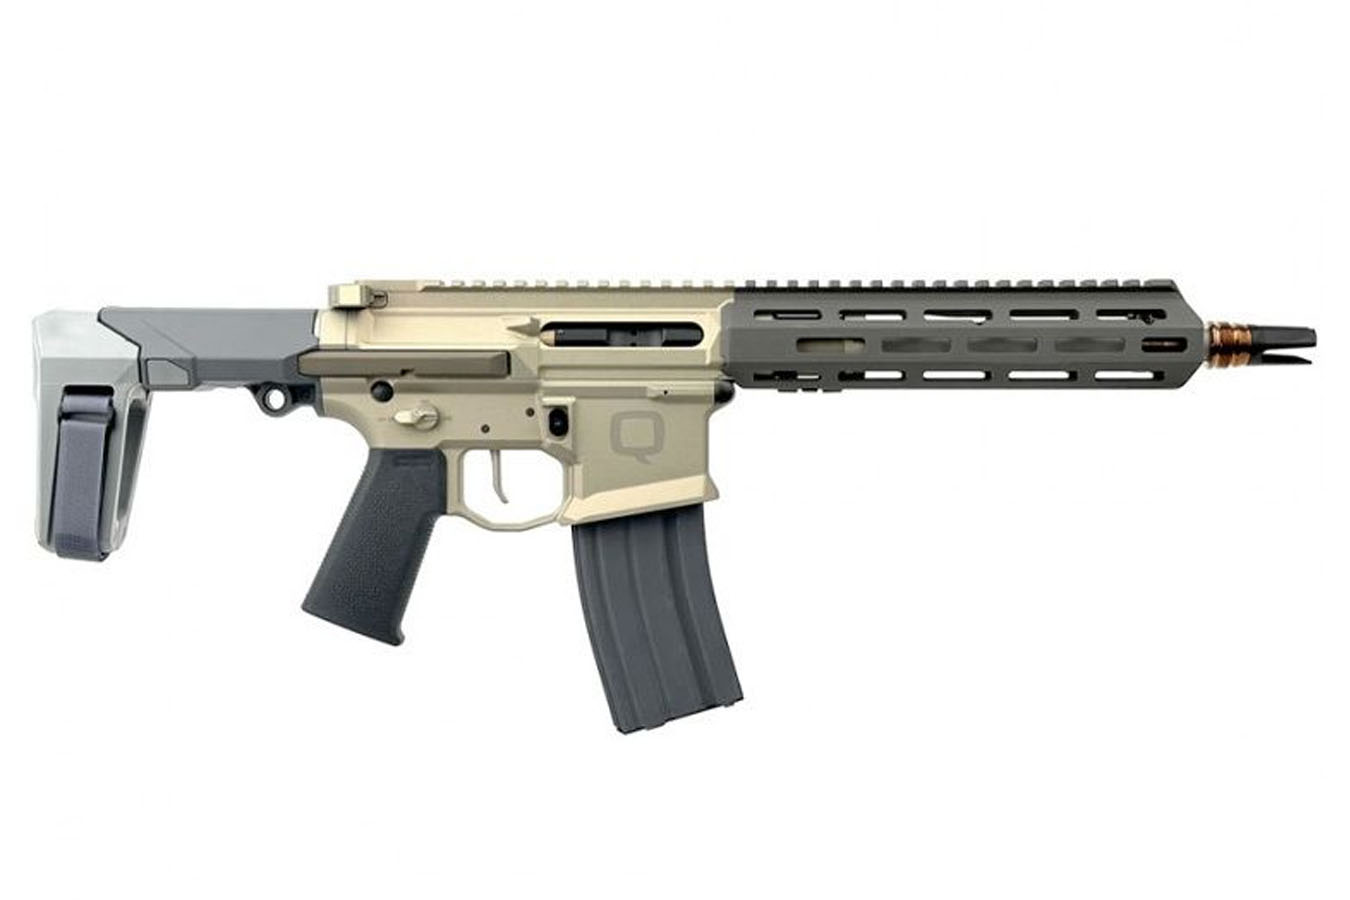 No. 19 Best Selling: Q HONEY BADGER 5.56MM 10` BARREL WITH BRACE GRAY ACCENTS